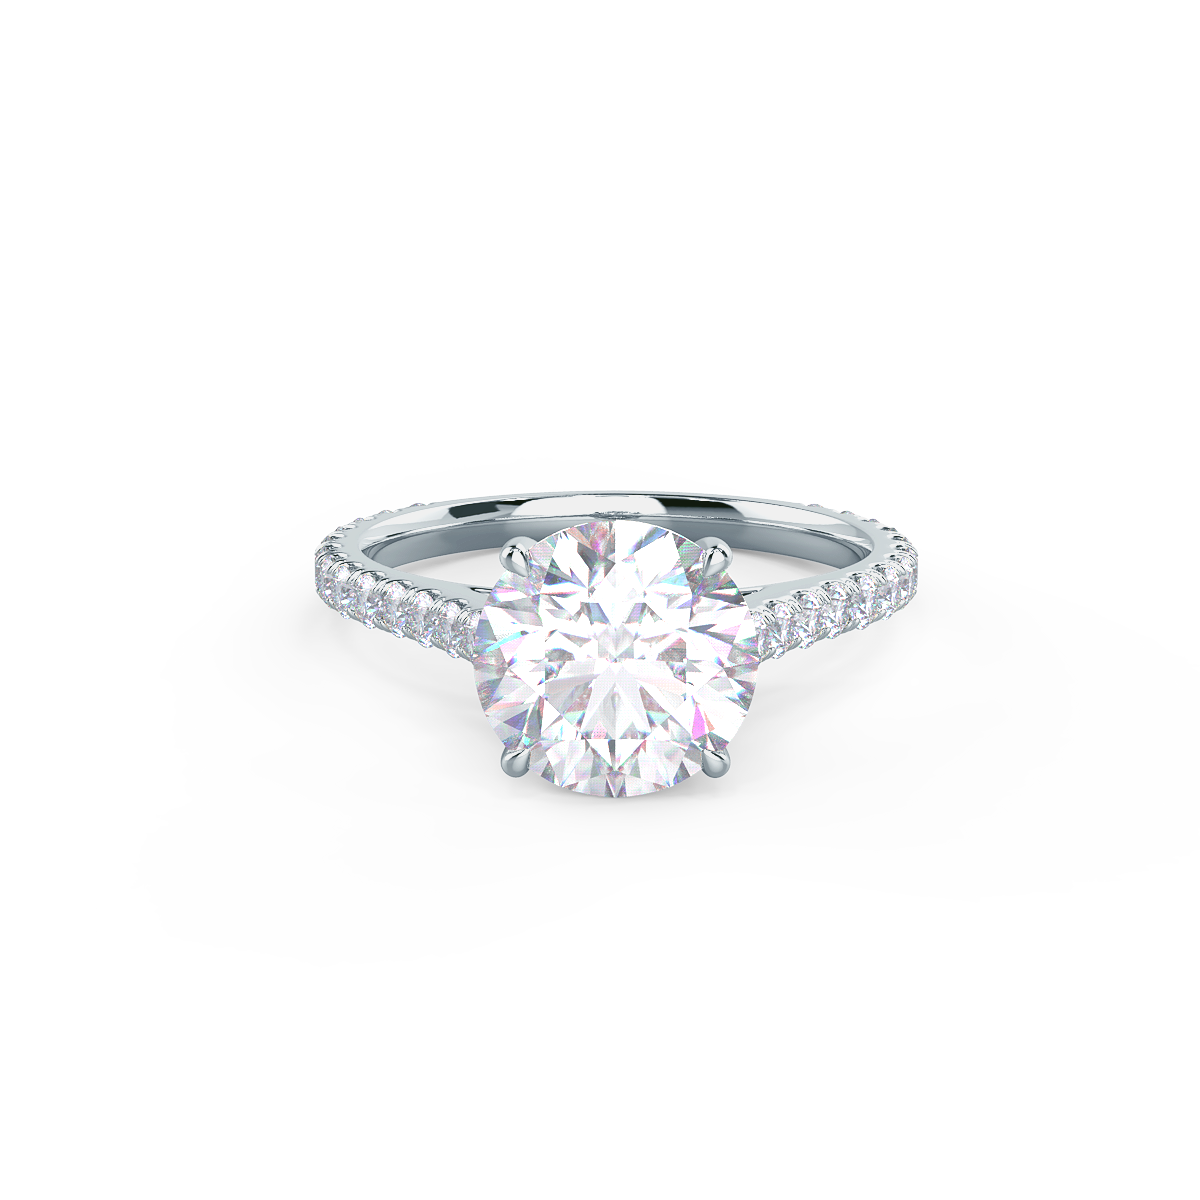 ROUND CATHEDRAL PAVÉ SETTING Lab grown Diamond Ring DEF Color VS+ Clarity